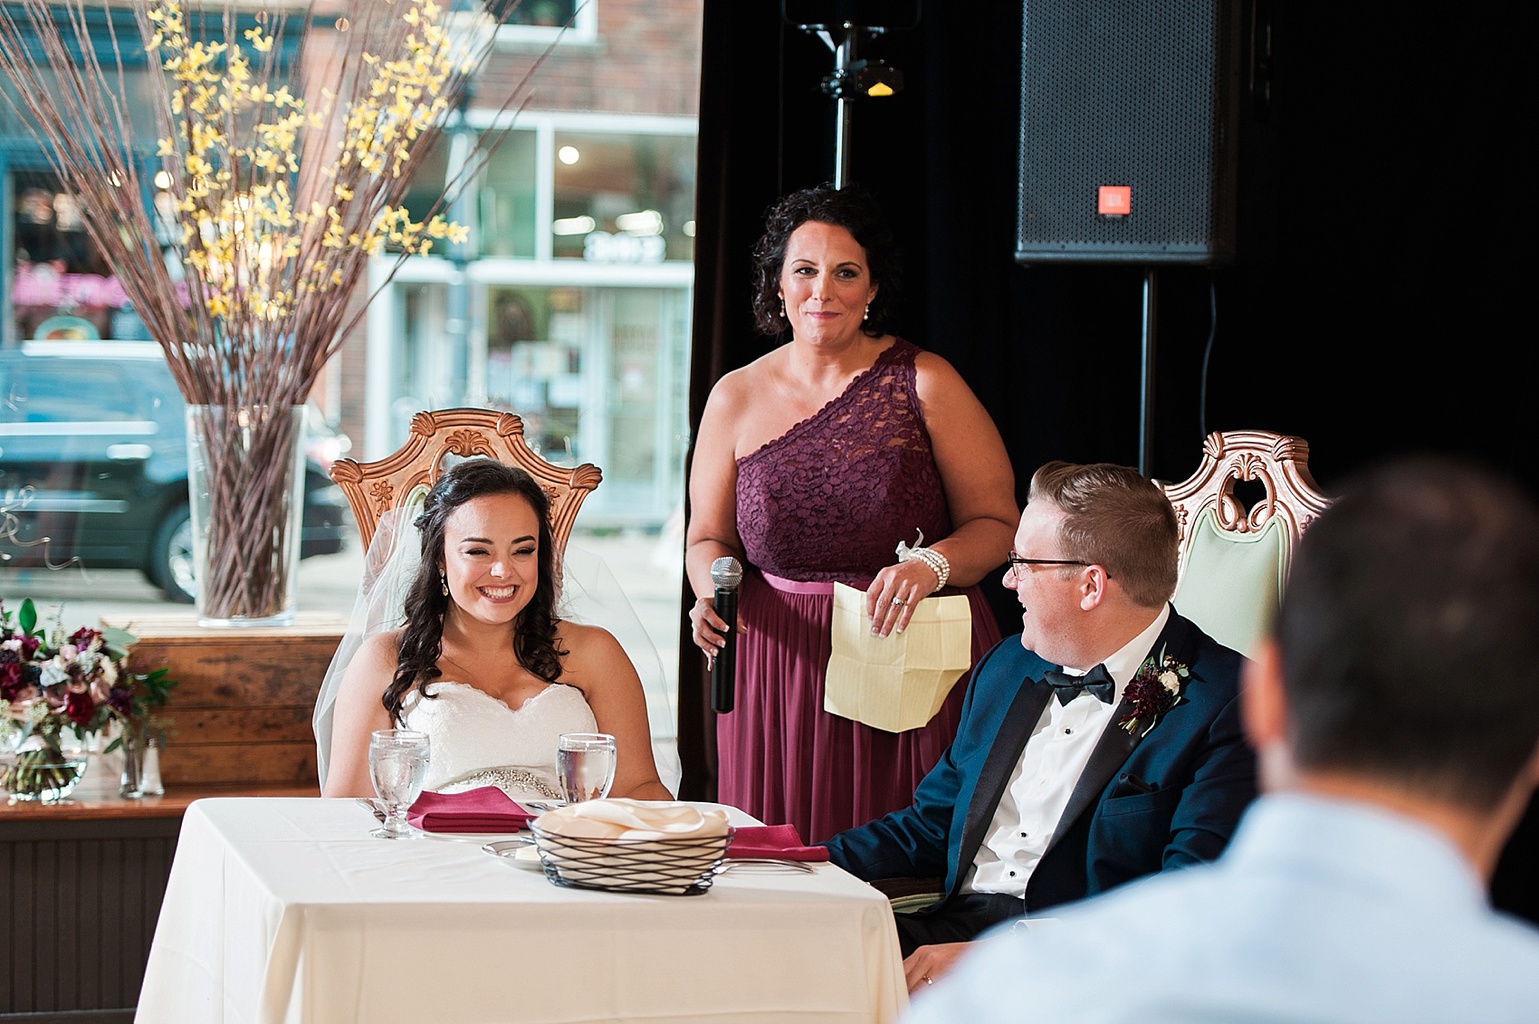 Lansing wedding venues: Old Town Marquee wedding reception photos